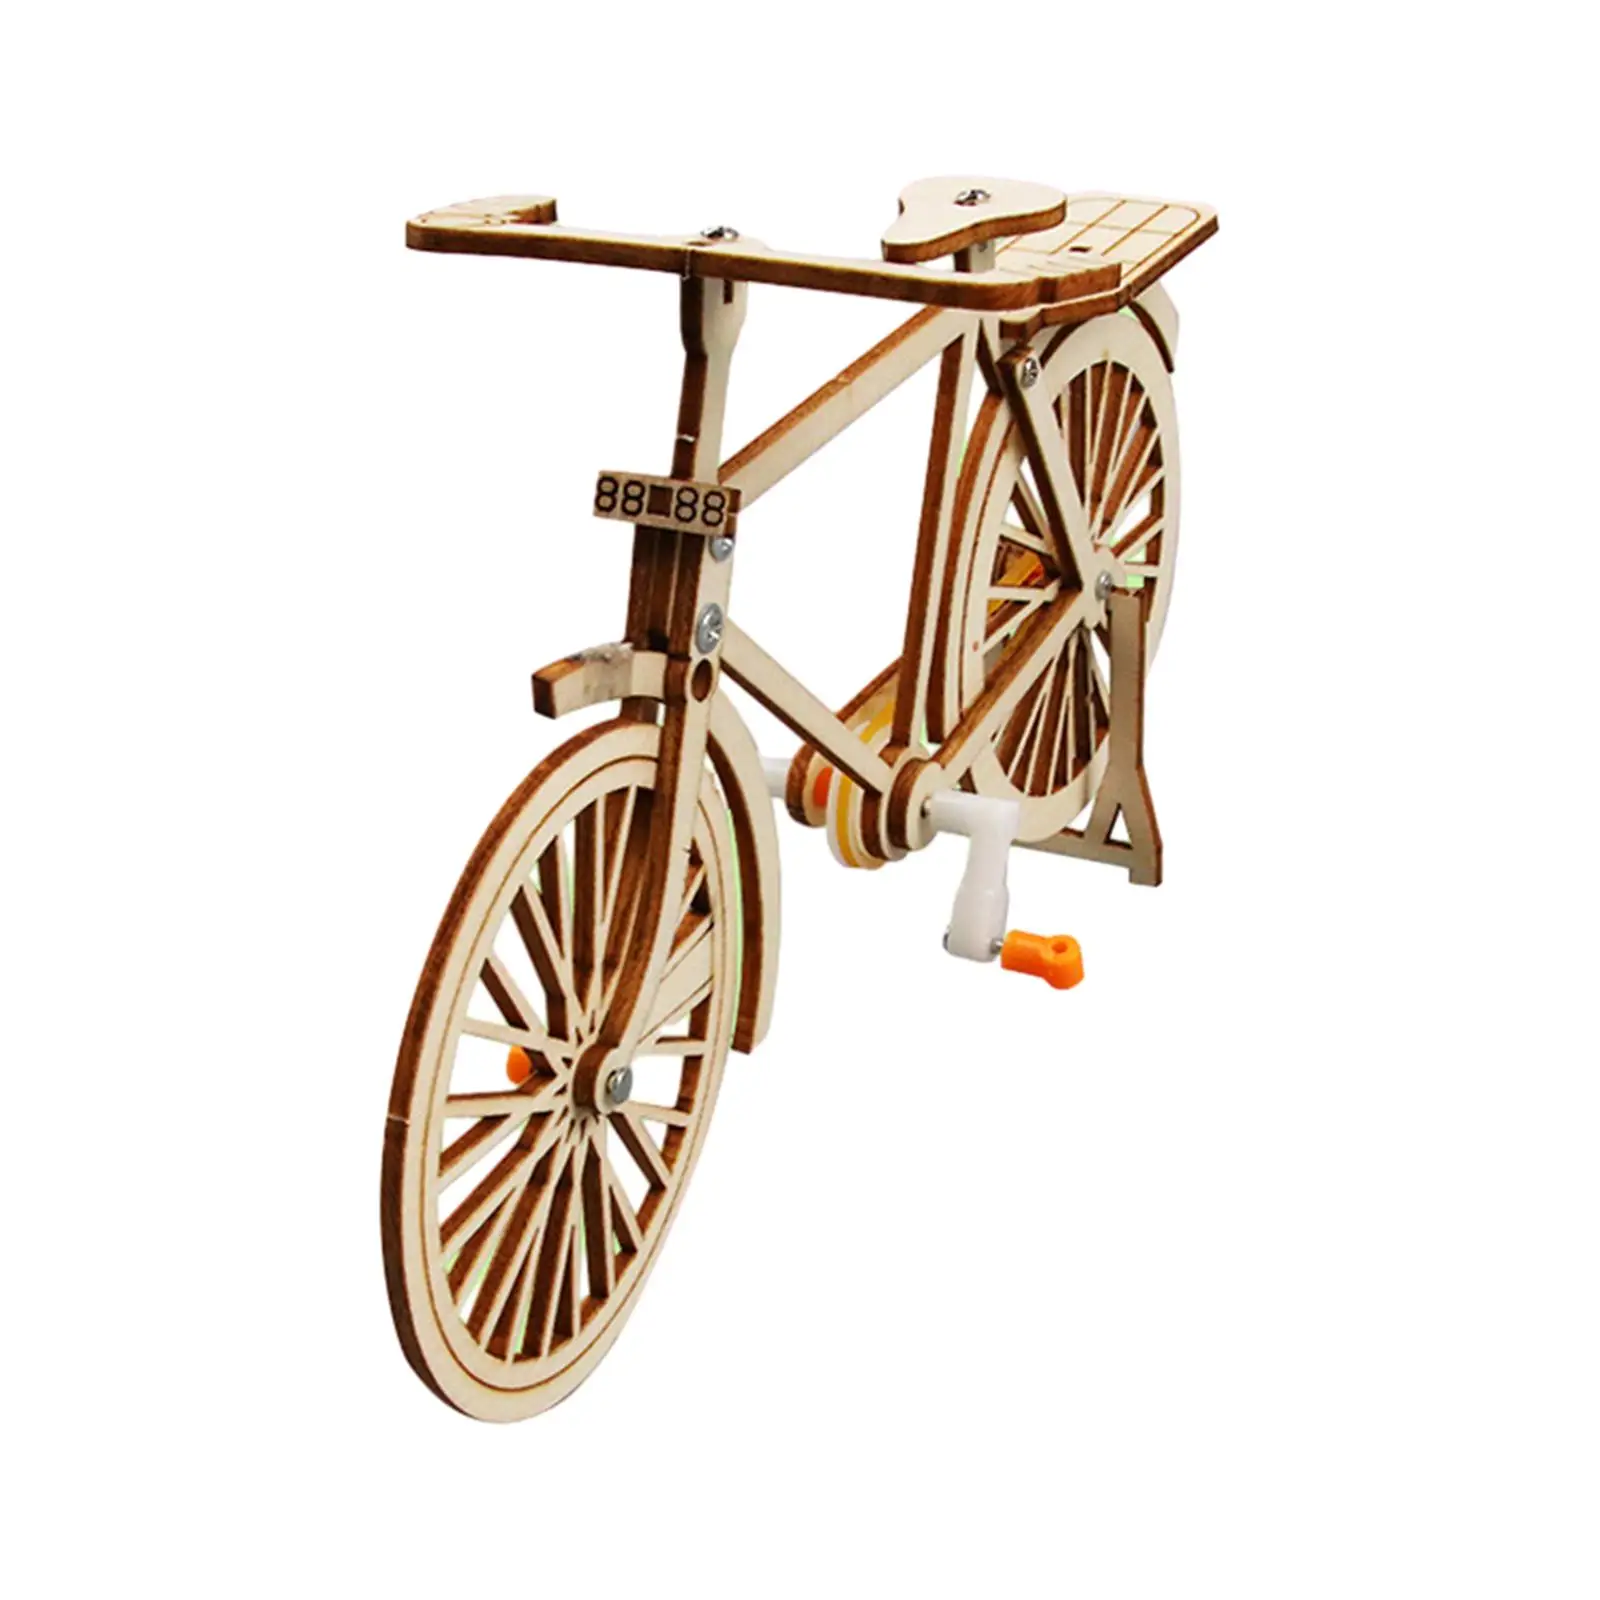 Small Bicycle Model Kits Technology Small Production Educational Toy DIY Multifunction DIY Assembly Educational for Children